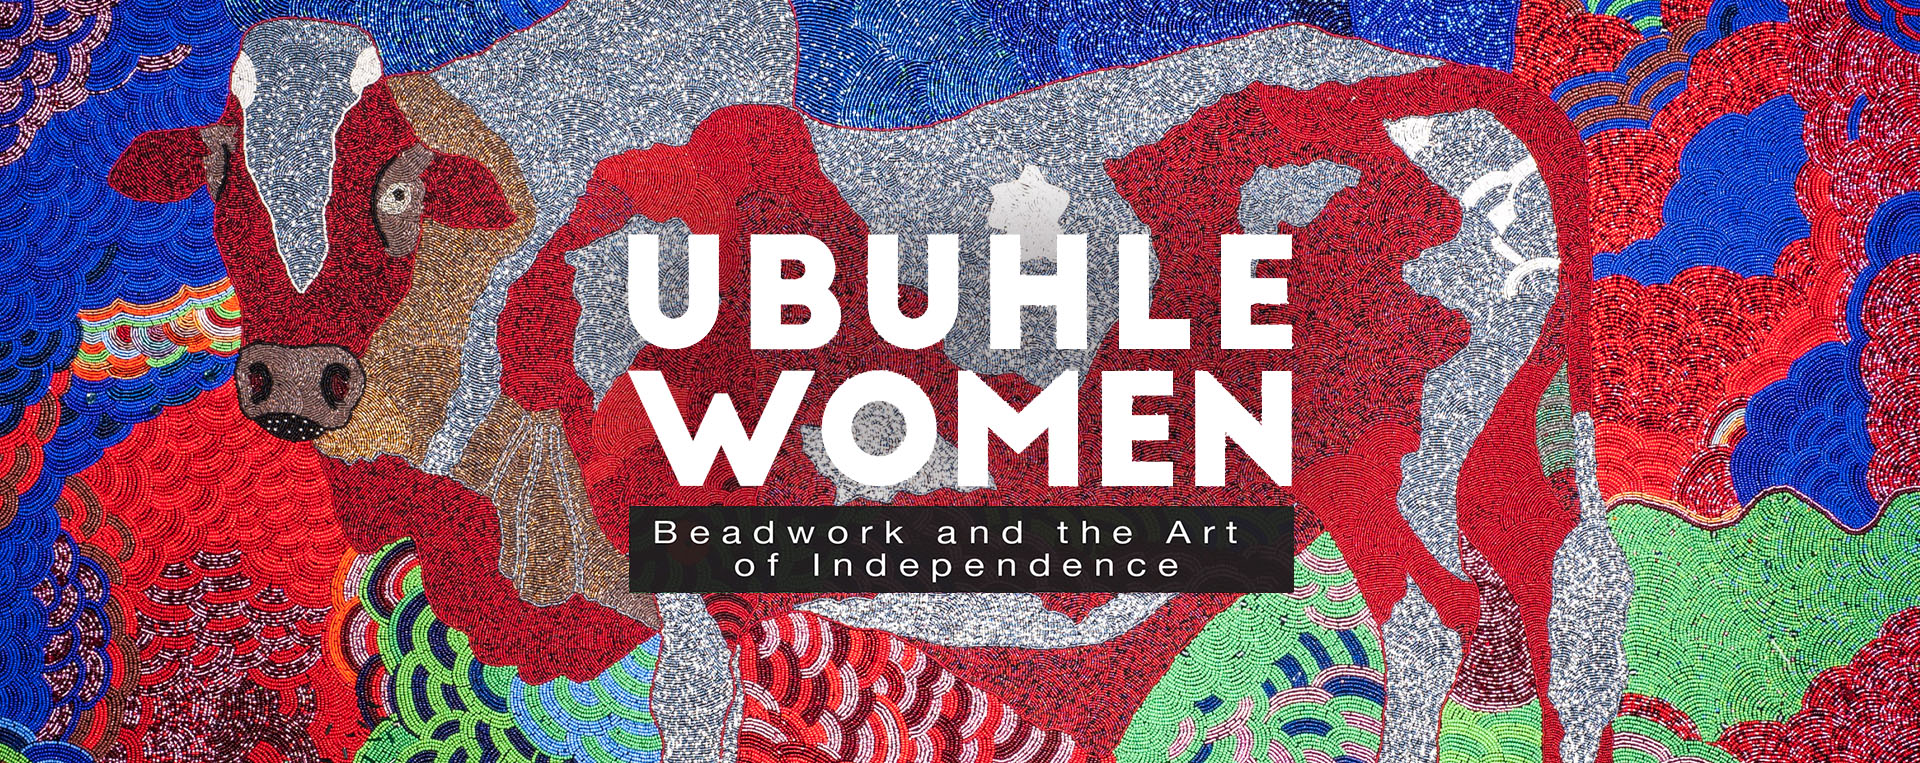 Exhibition Opening - Ubuhle Women: Beadwork and the Art of Independence